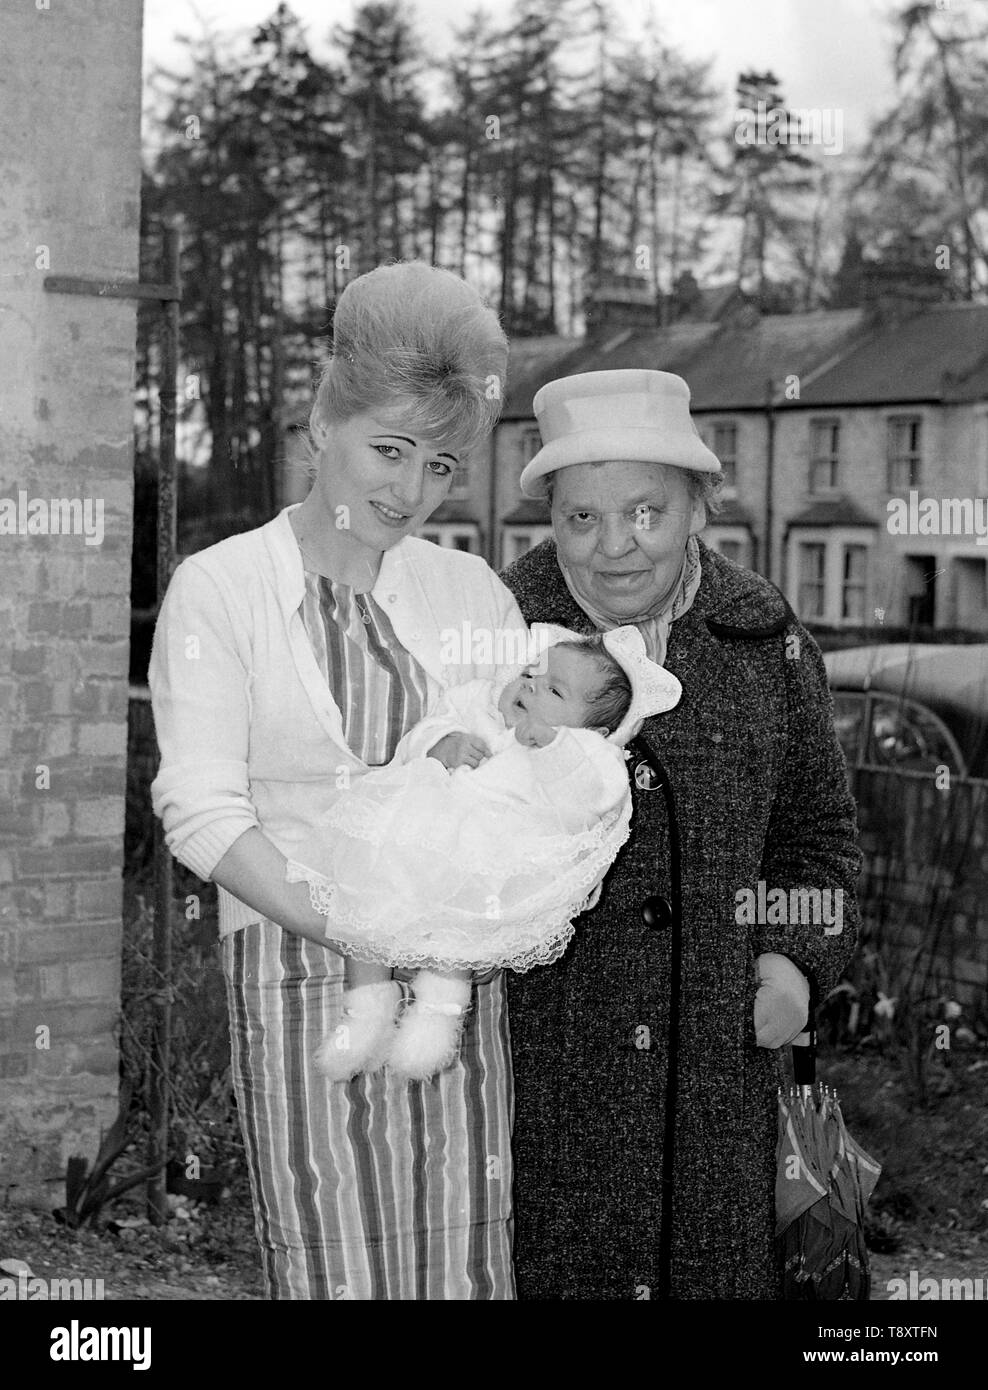 A Baby Christening in the UK c1962  Photo by Tony Henshaw Stock Photo